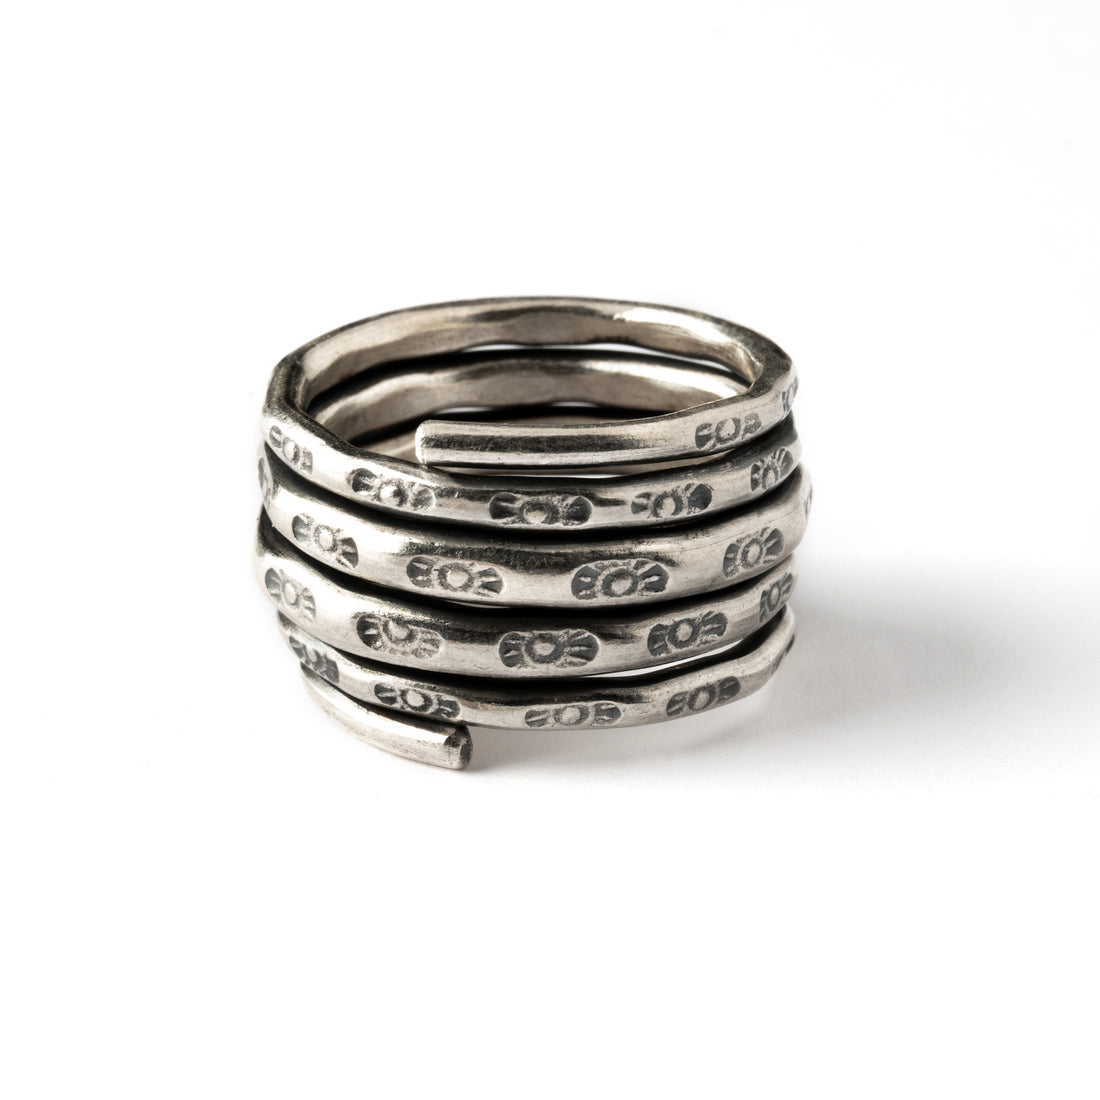 Tribal Silver Ring With Carving Decorations frontal view